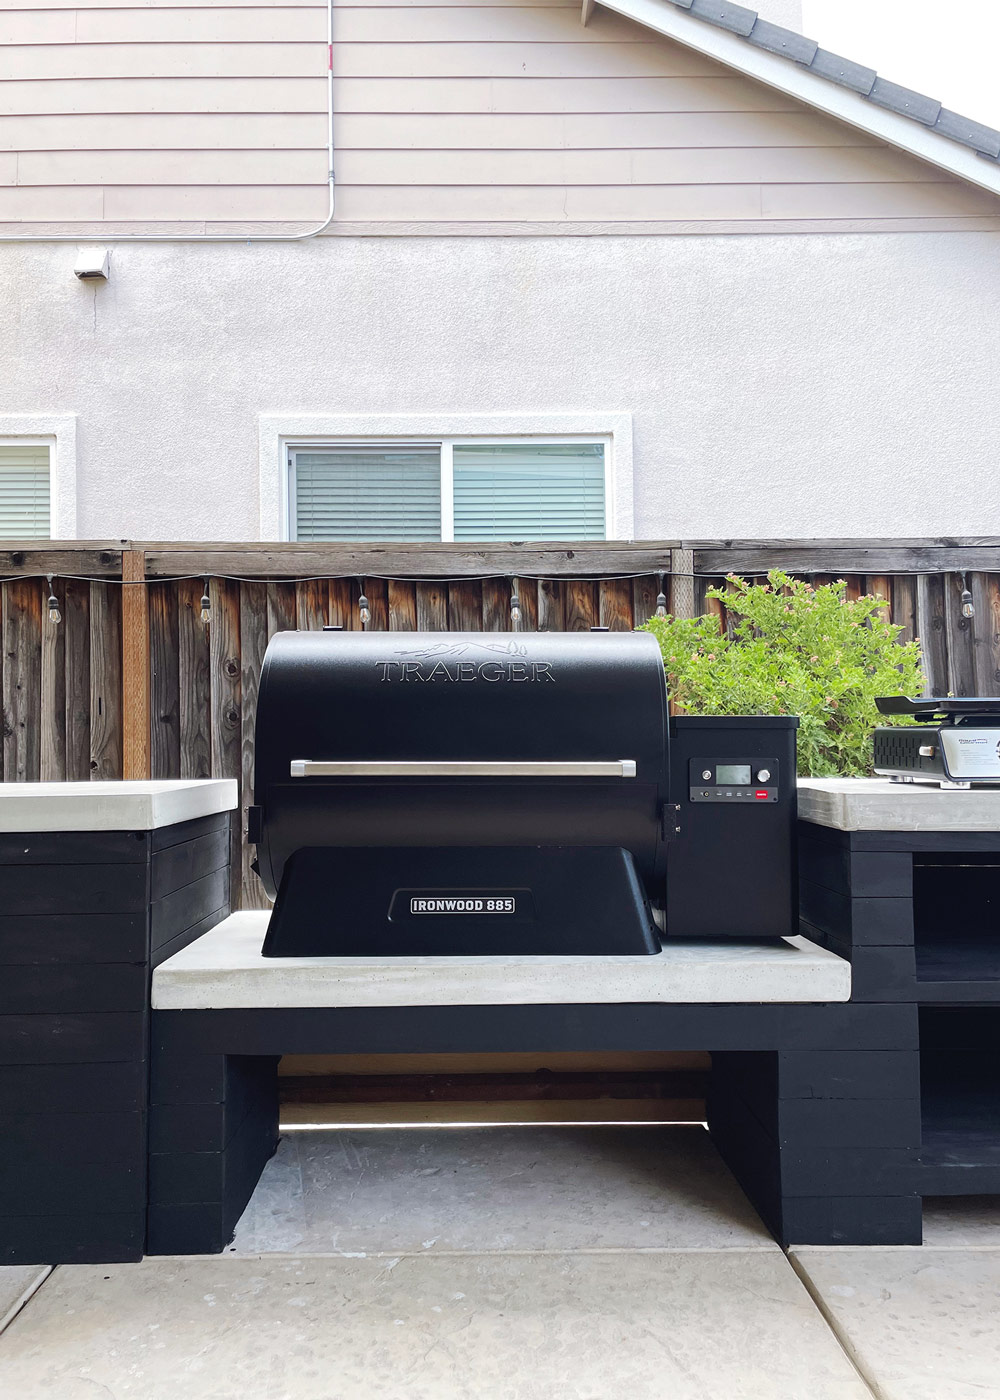 Traeger Grill placed on a DIY black and white countertop